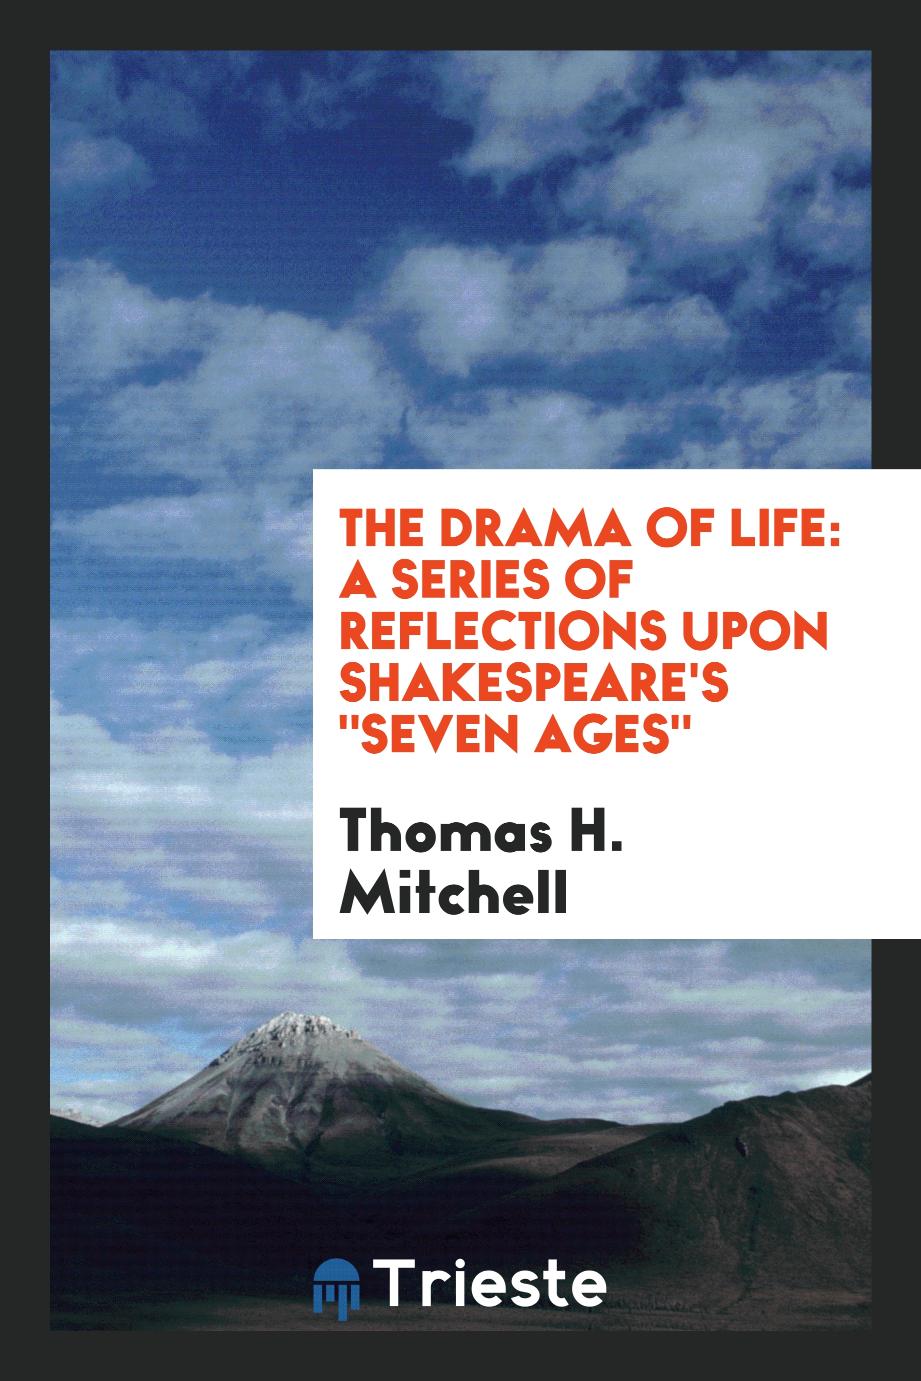 The drama of life: a series of reflections upon Shakespeare's "seven ages"